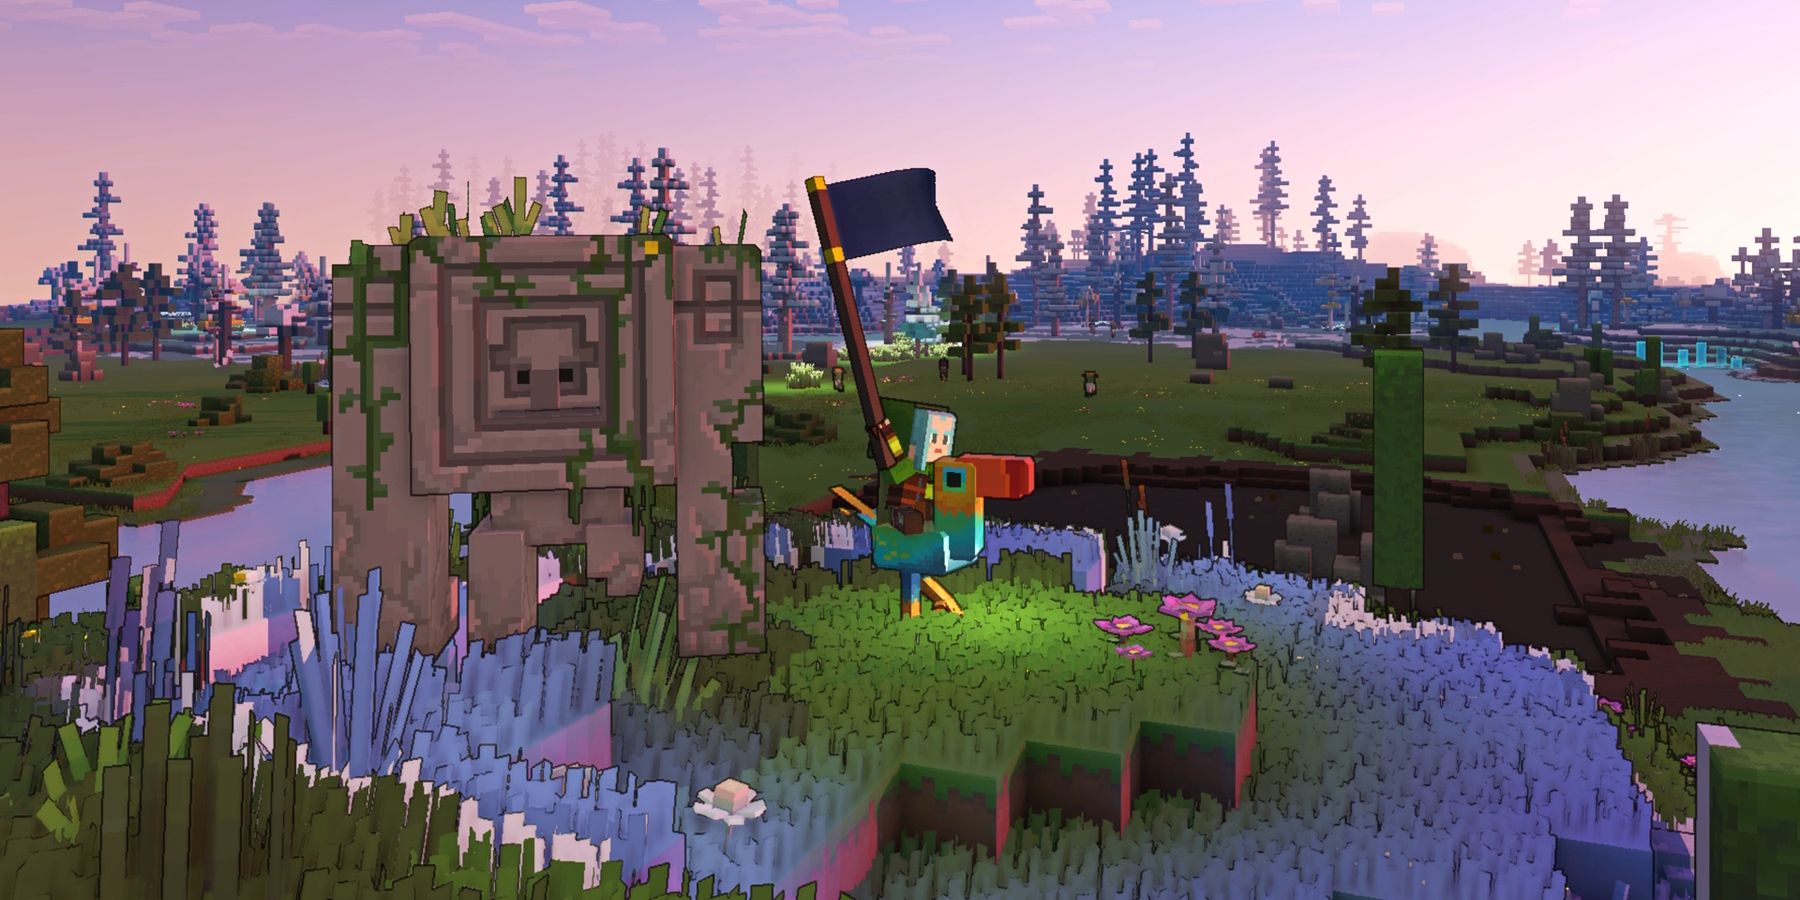 Minecraft Legends Player Calling Reinforcements, a golem stands beside them, while they are riding on a colorful bird creature